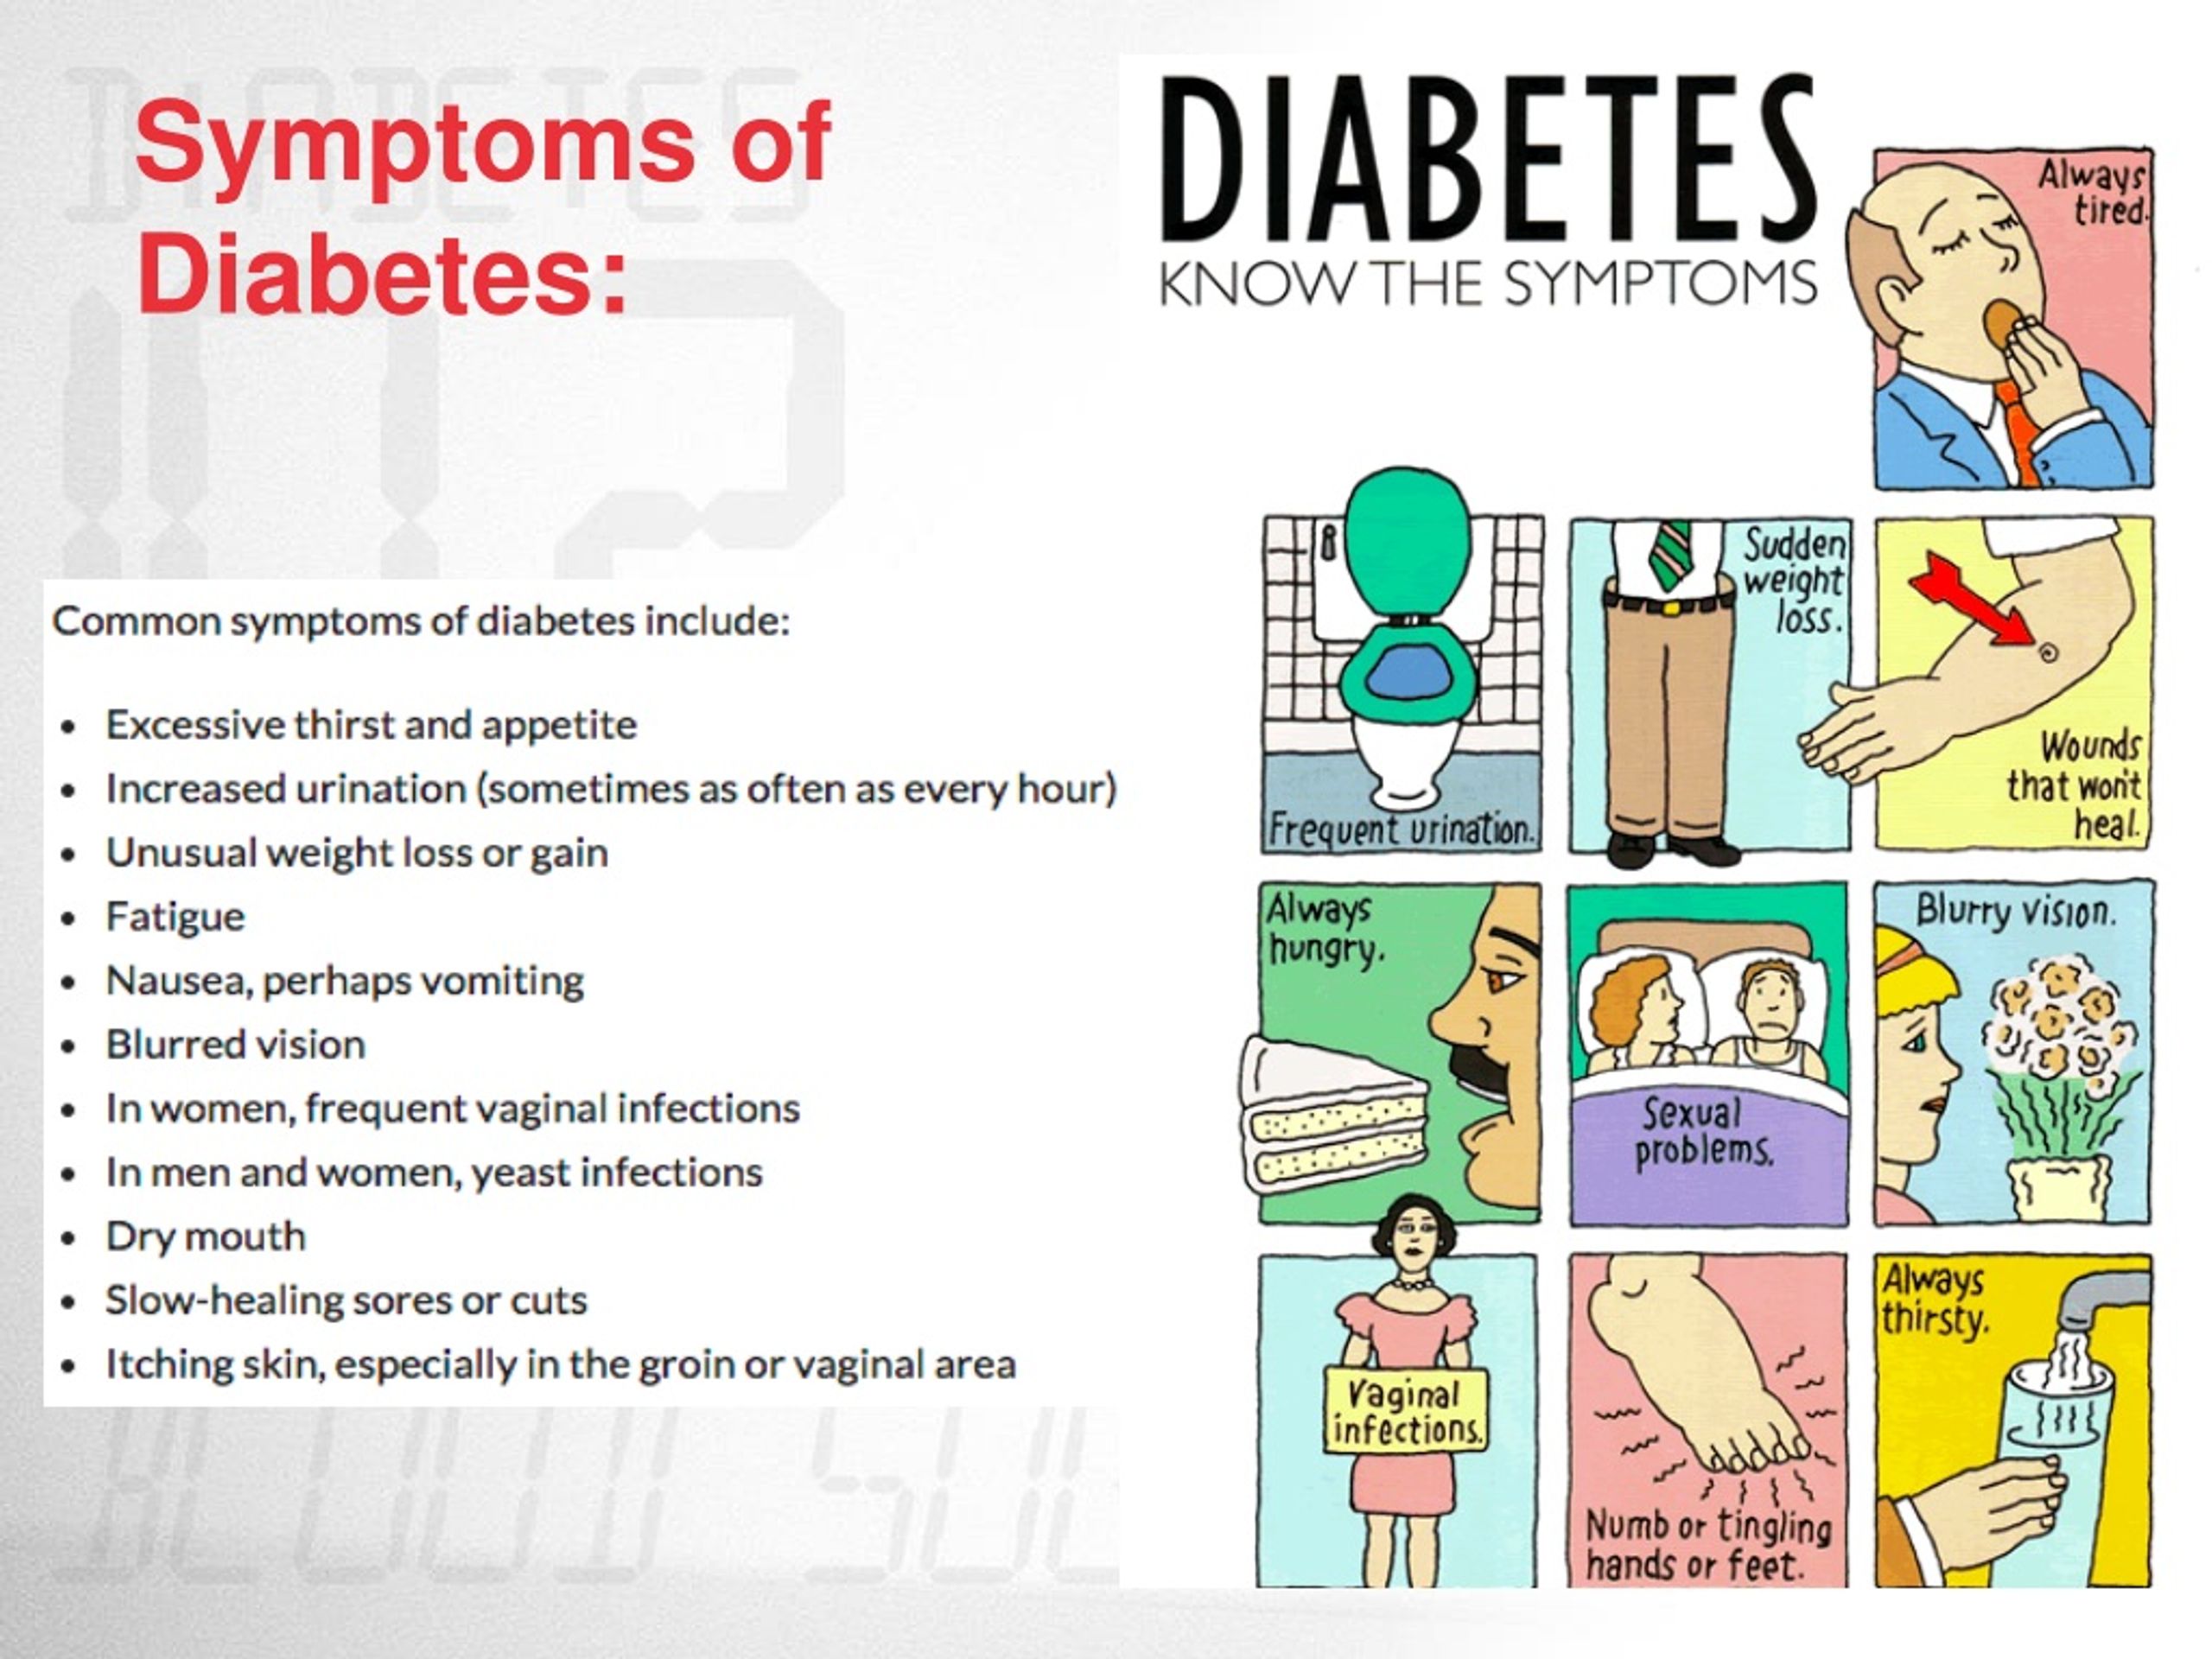 what is diabetes ppt presentation